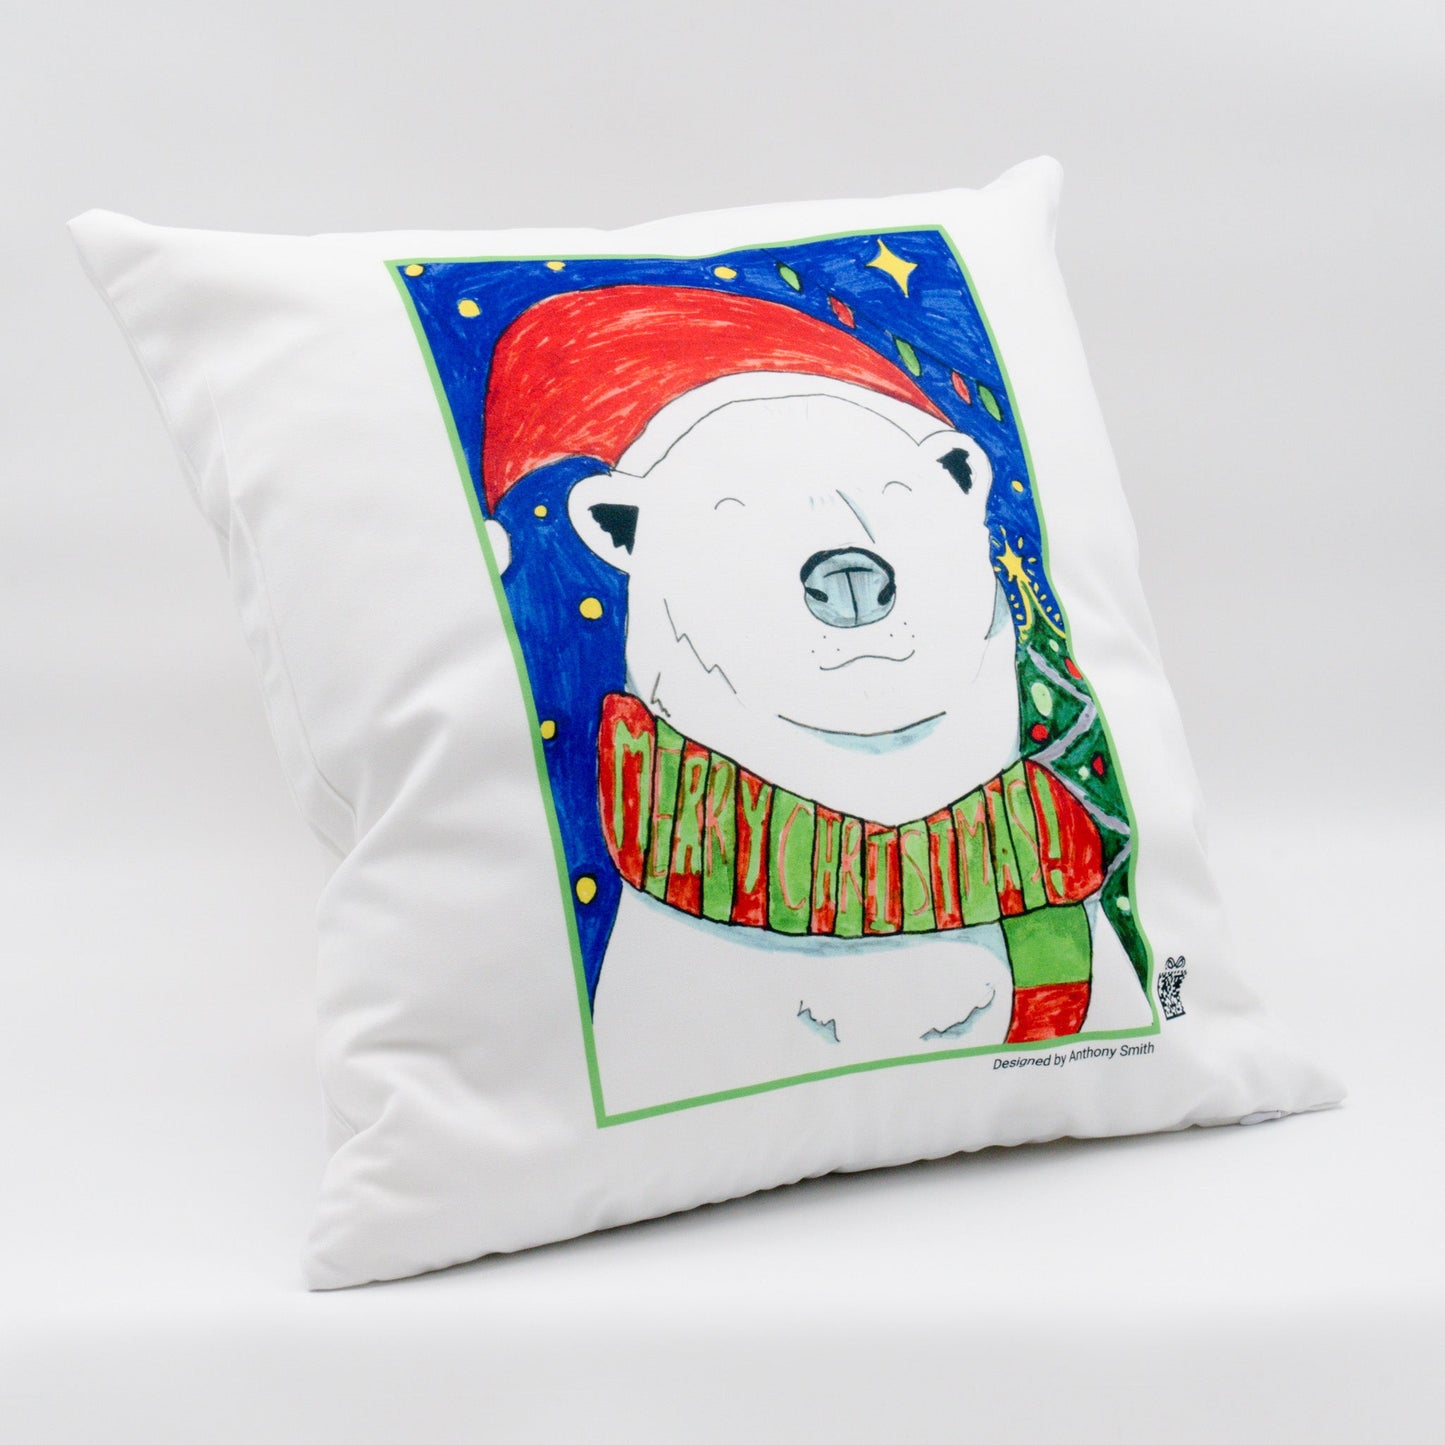 100% White Cotton Eco Friendly Cushion Cover (Cushion Insert Available) - 45cm Square